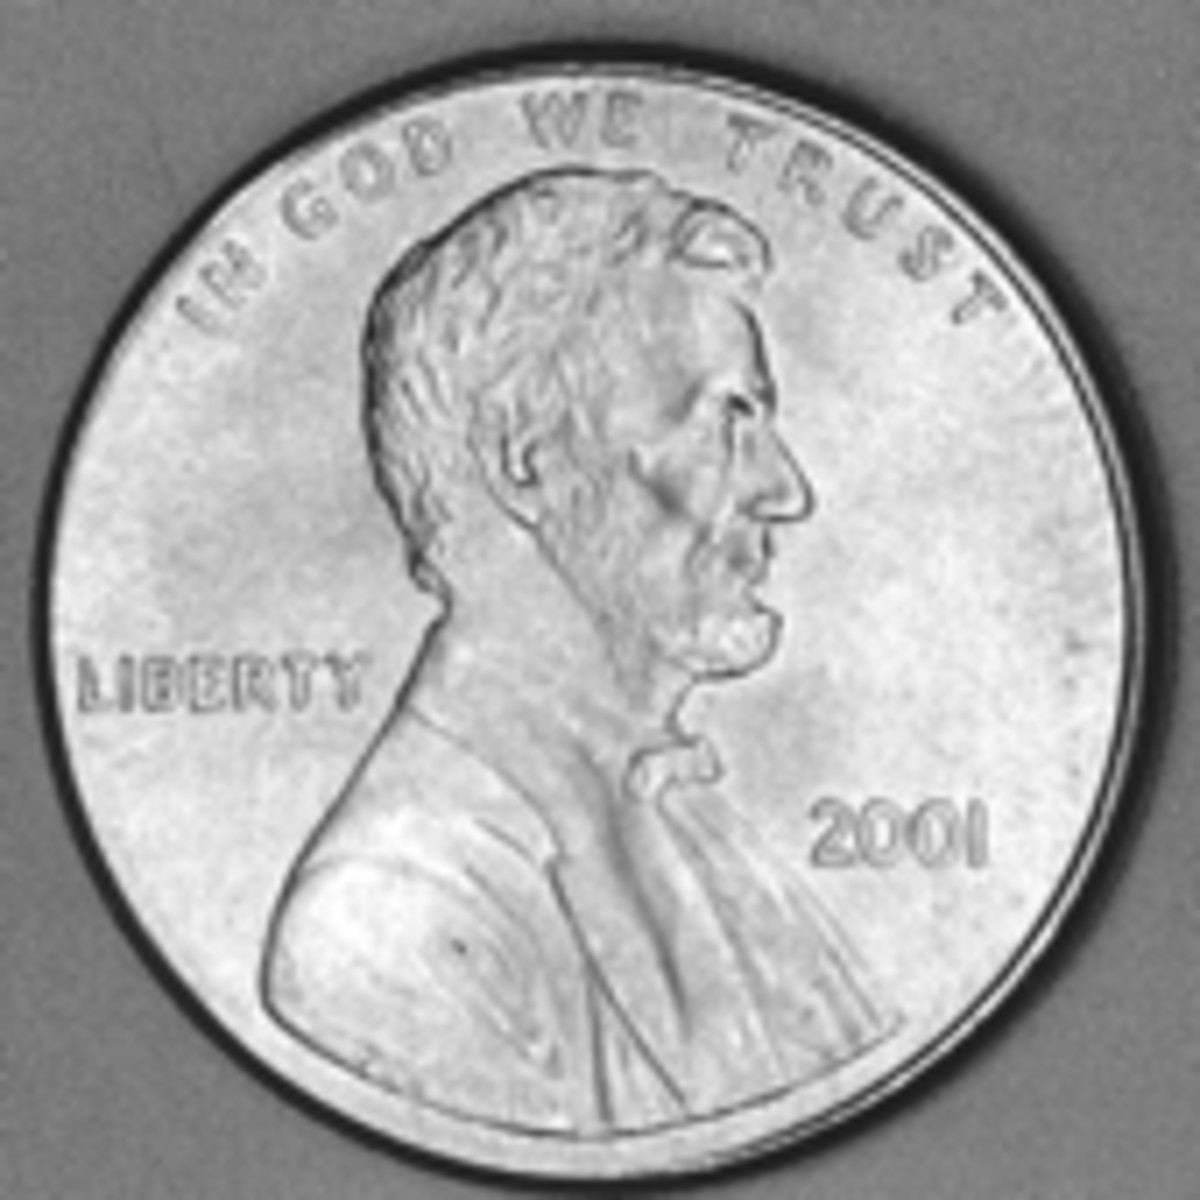 Not a penny more: the time to abolish the US coin has come